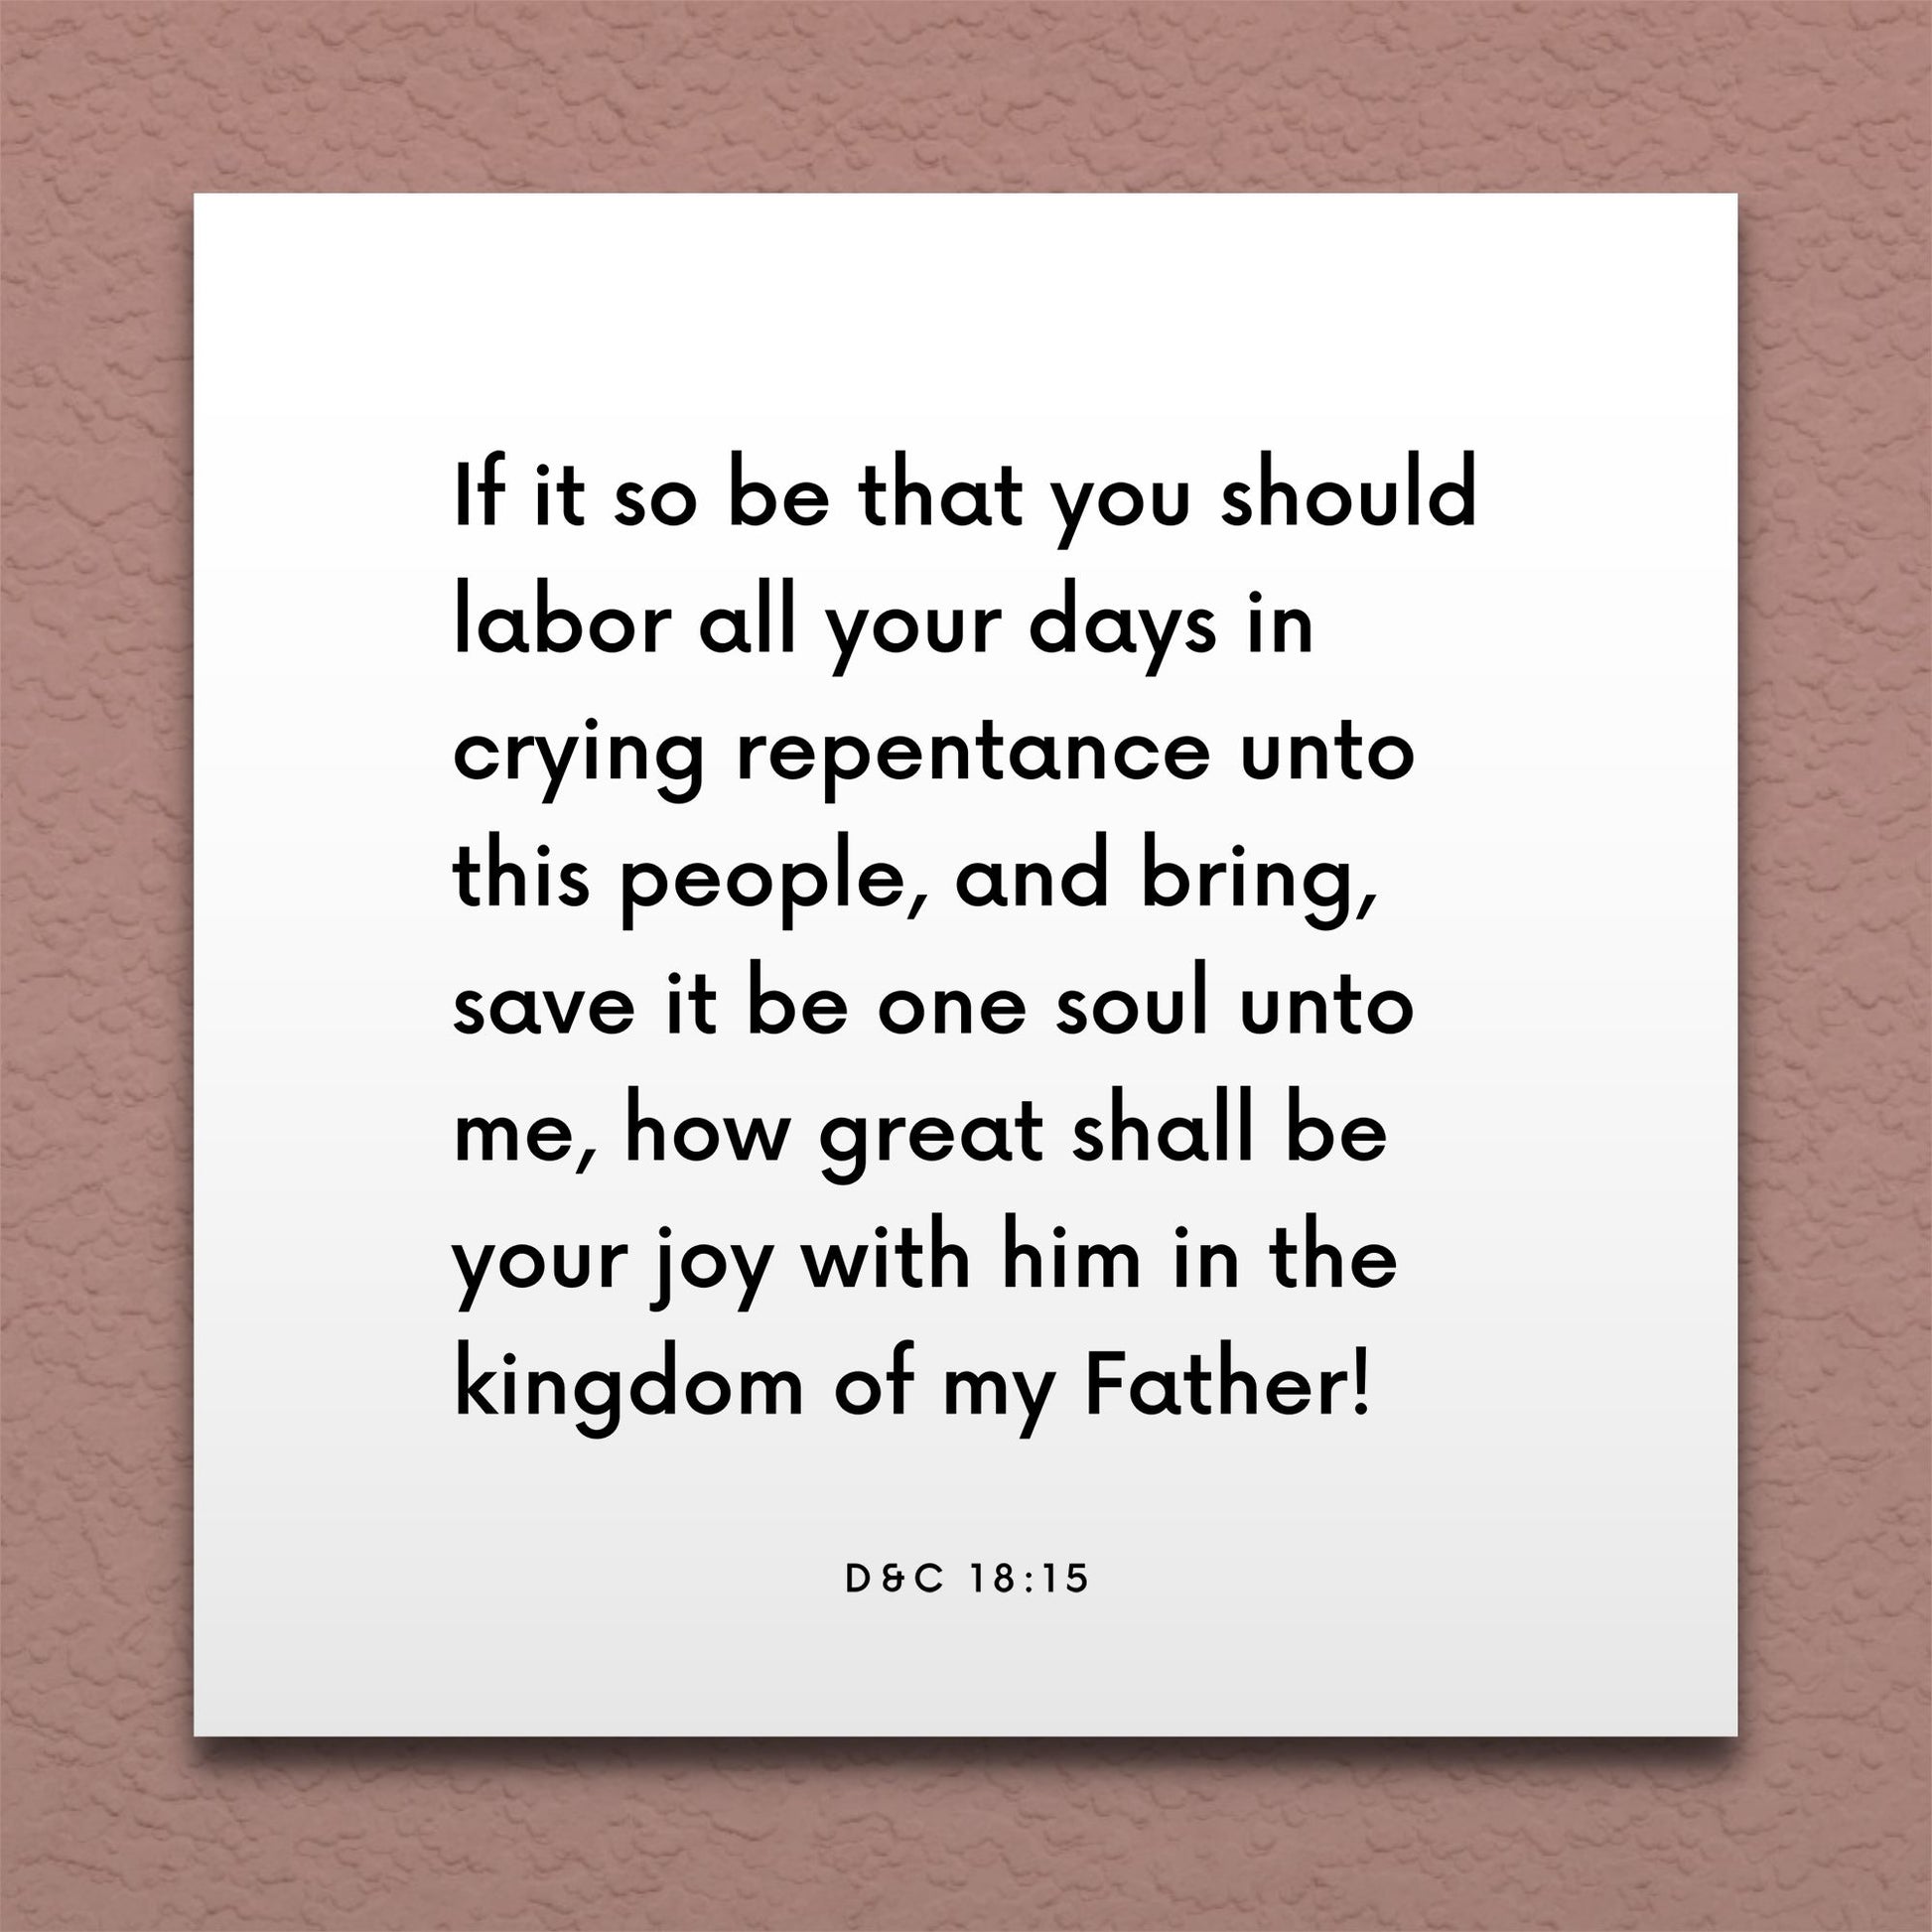 Wall-mounted scripture tile for D&C 18:15 - "How great shall be your joy with him in the kingdom"